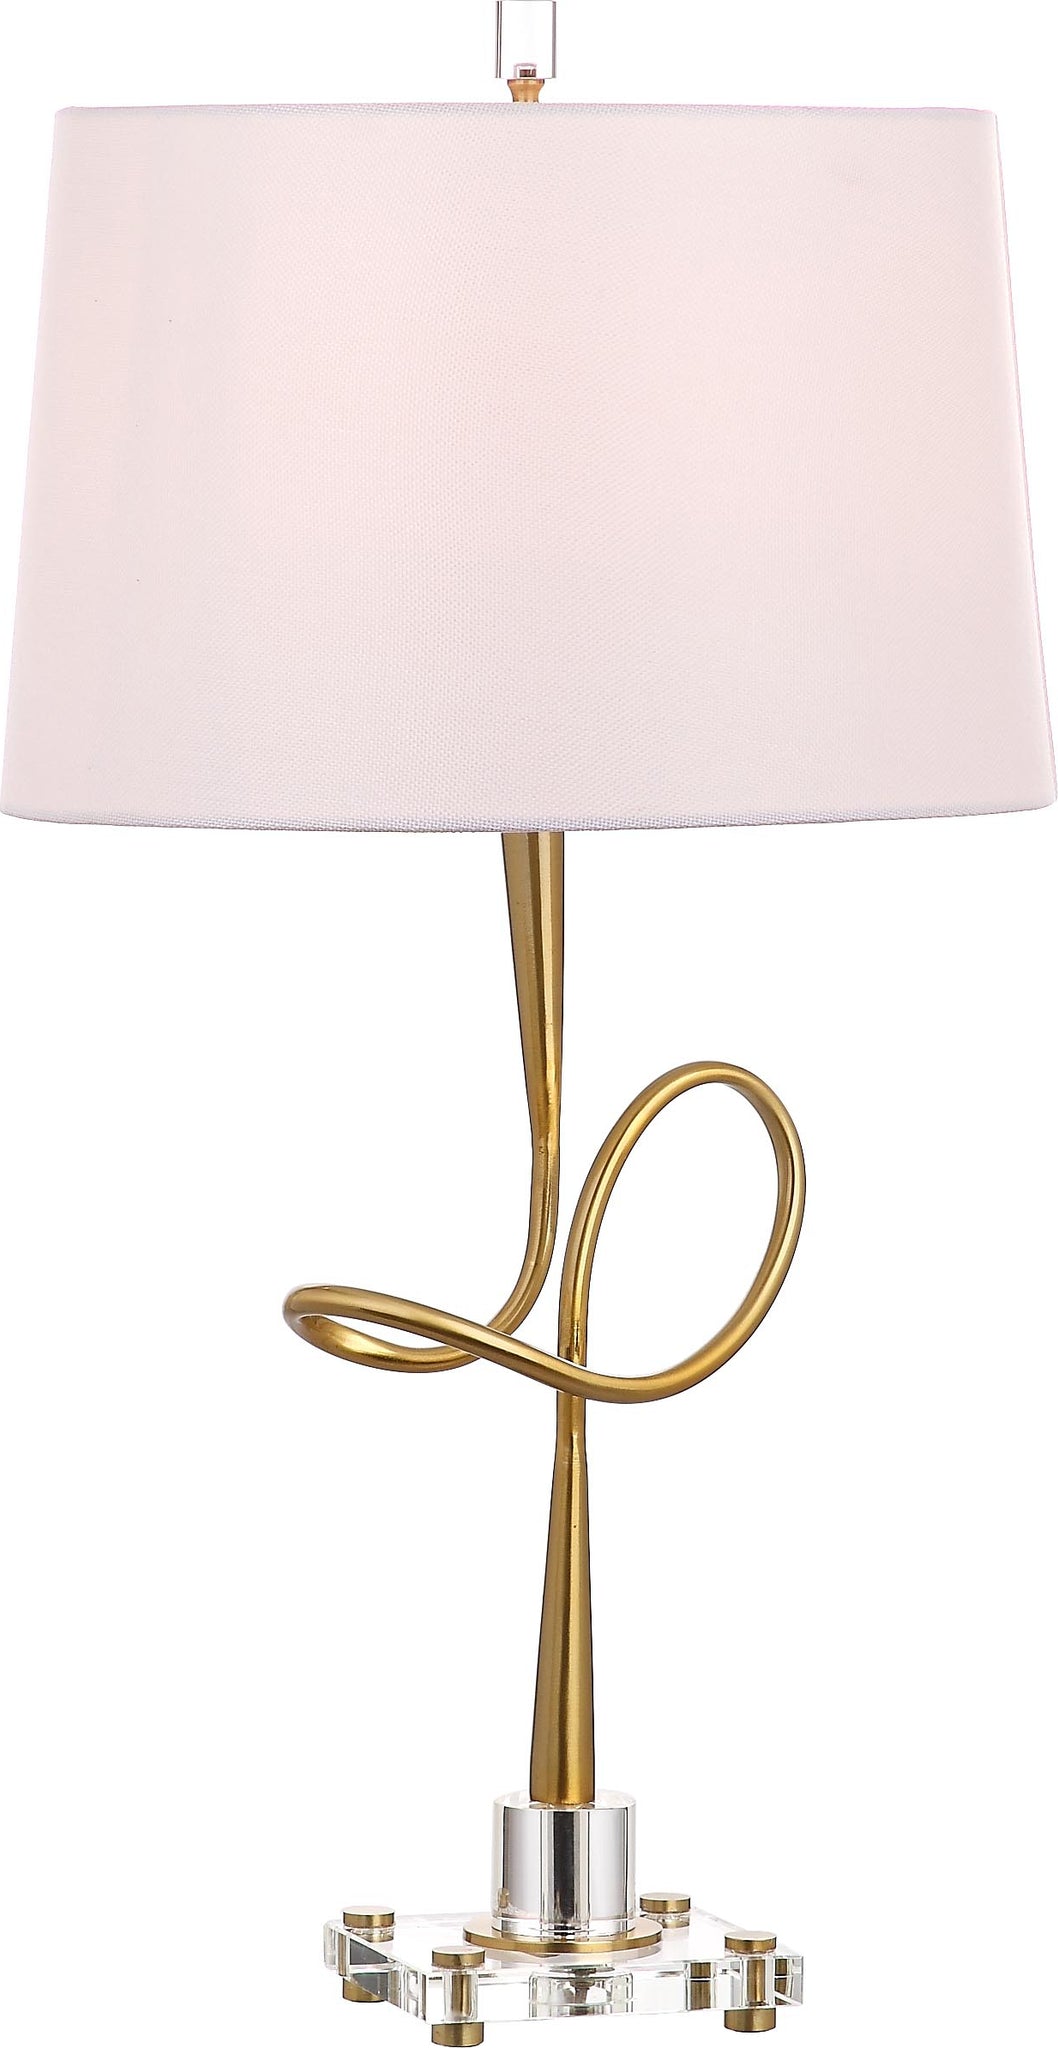 Safavieh Hensley 3025-Inch H Table Lamp Gold/Clear Mirror main image